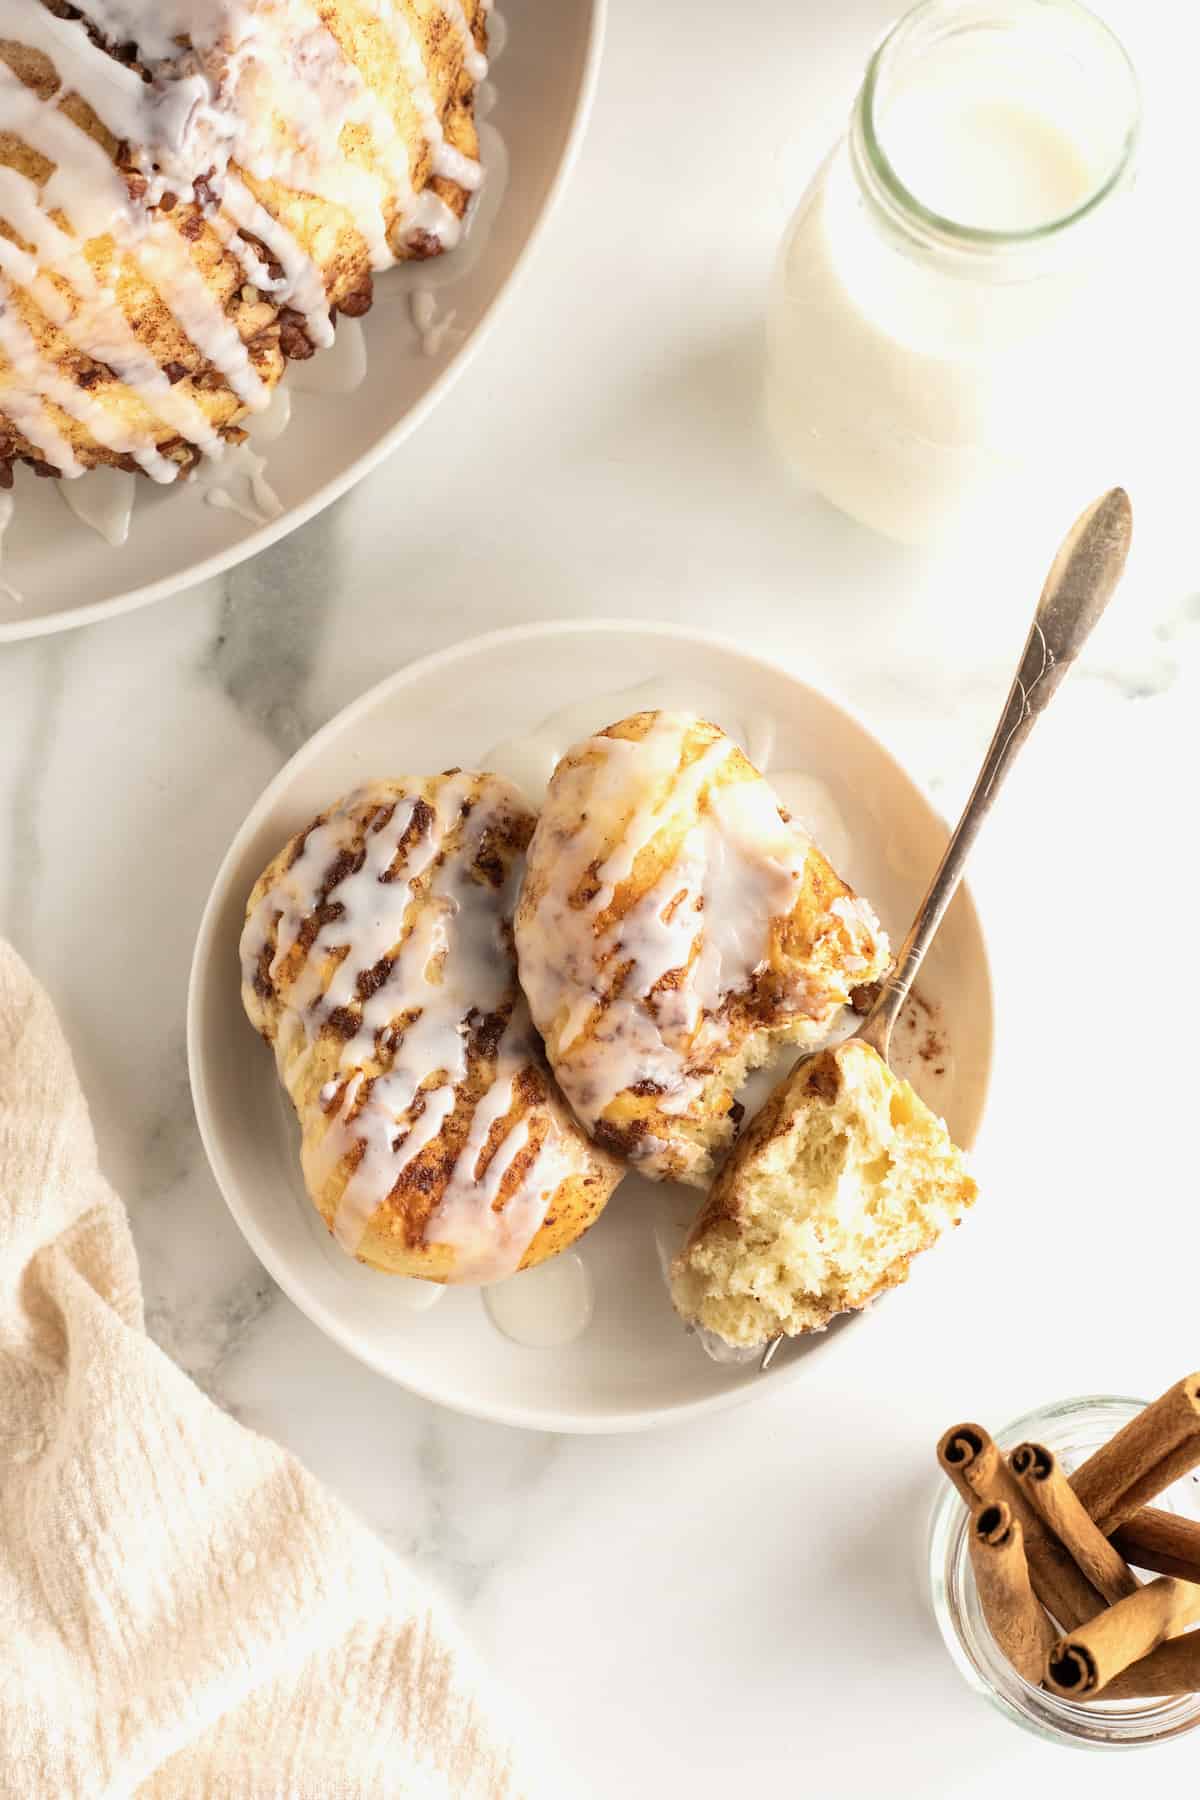 Two sweet rolls covered in glaze and chopped pecans on a white plate with a fork.